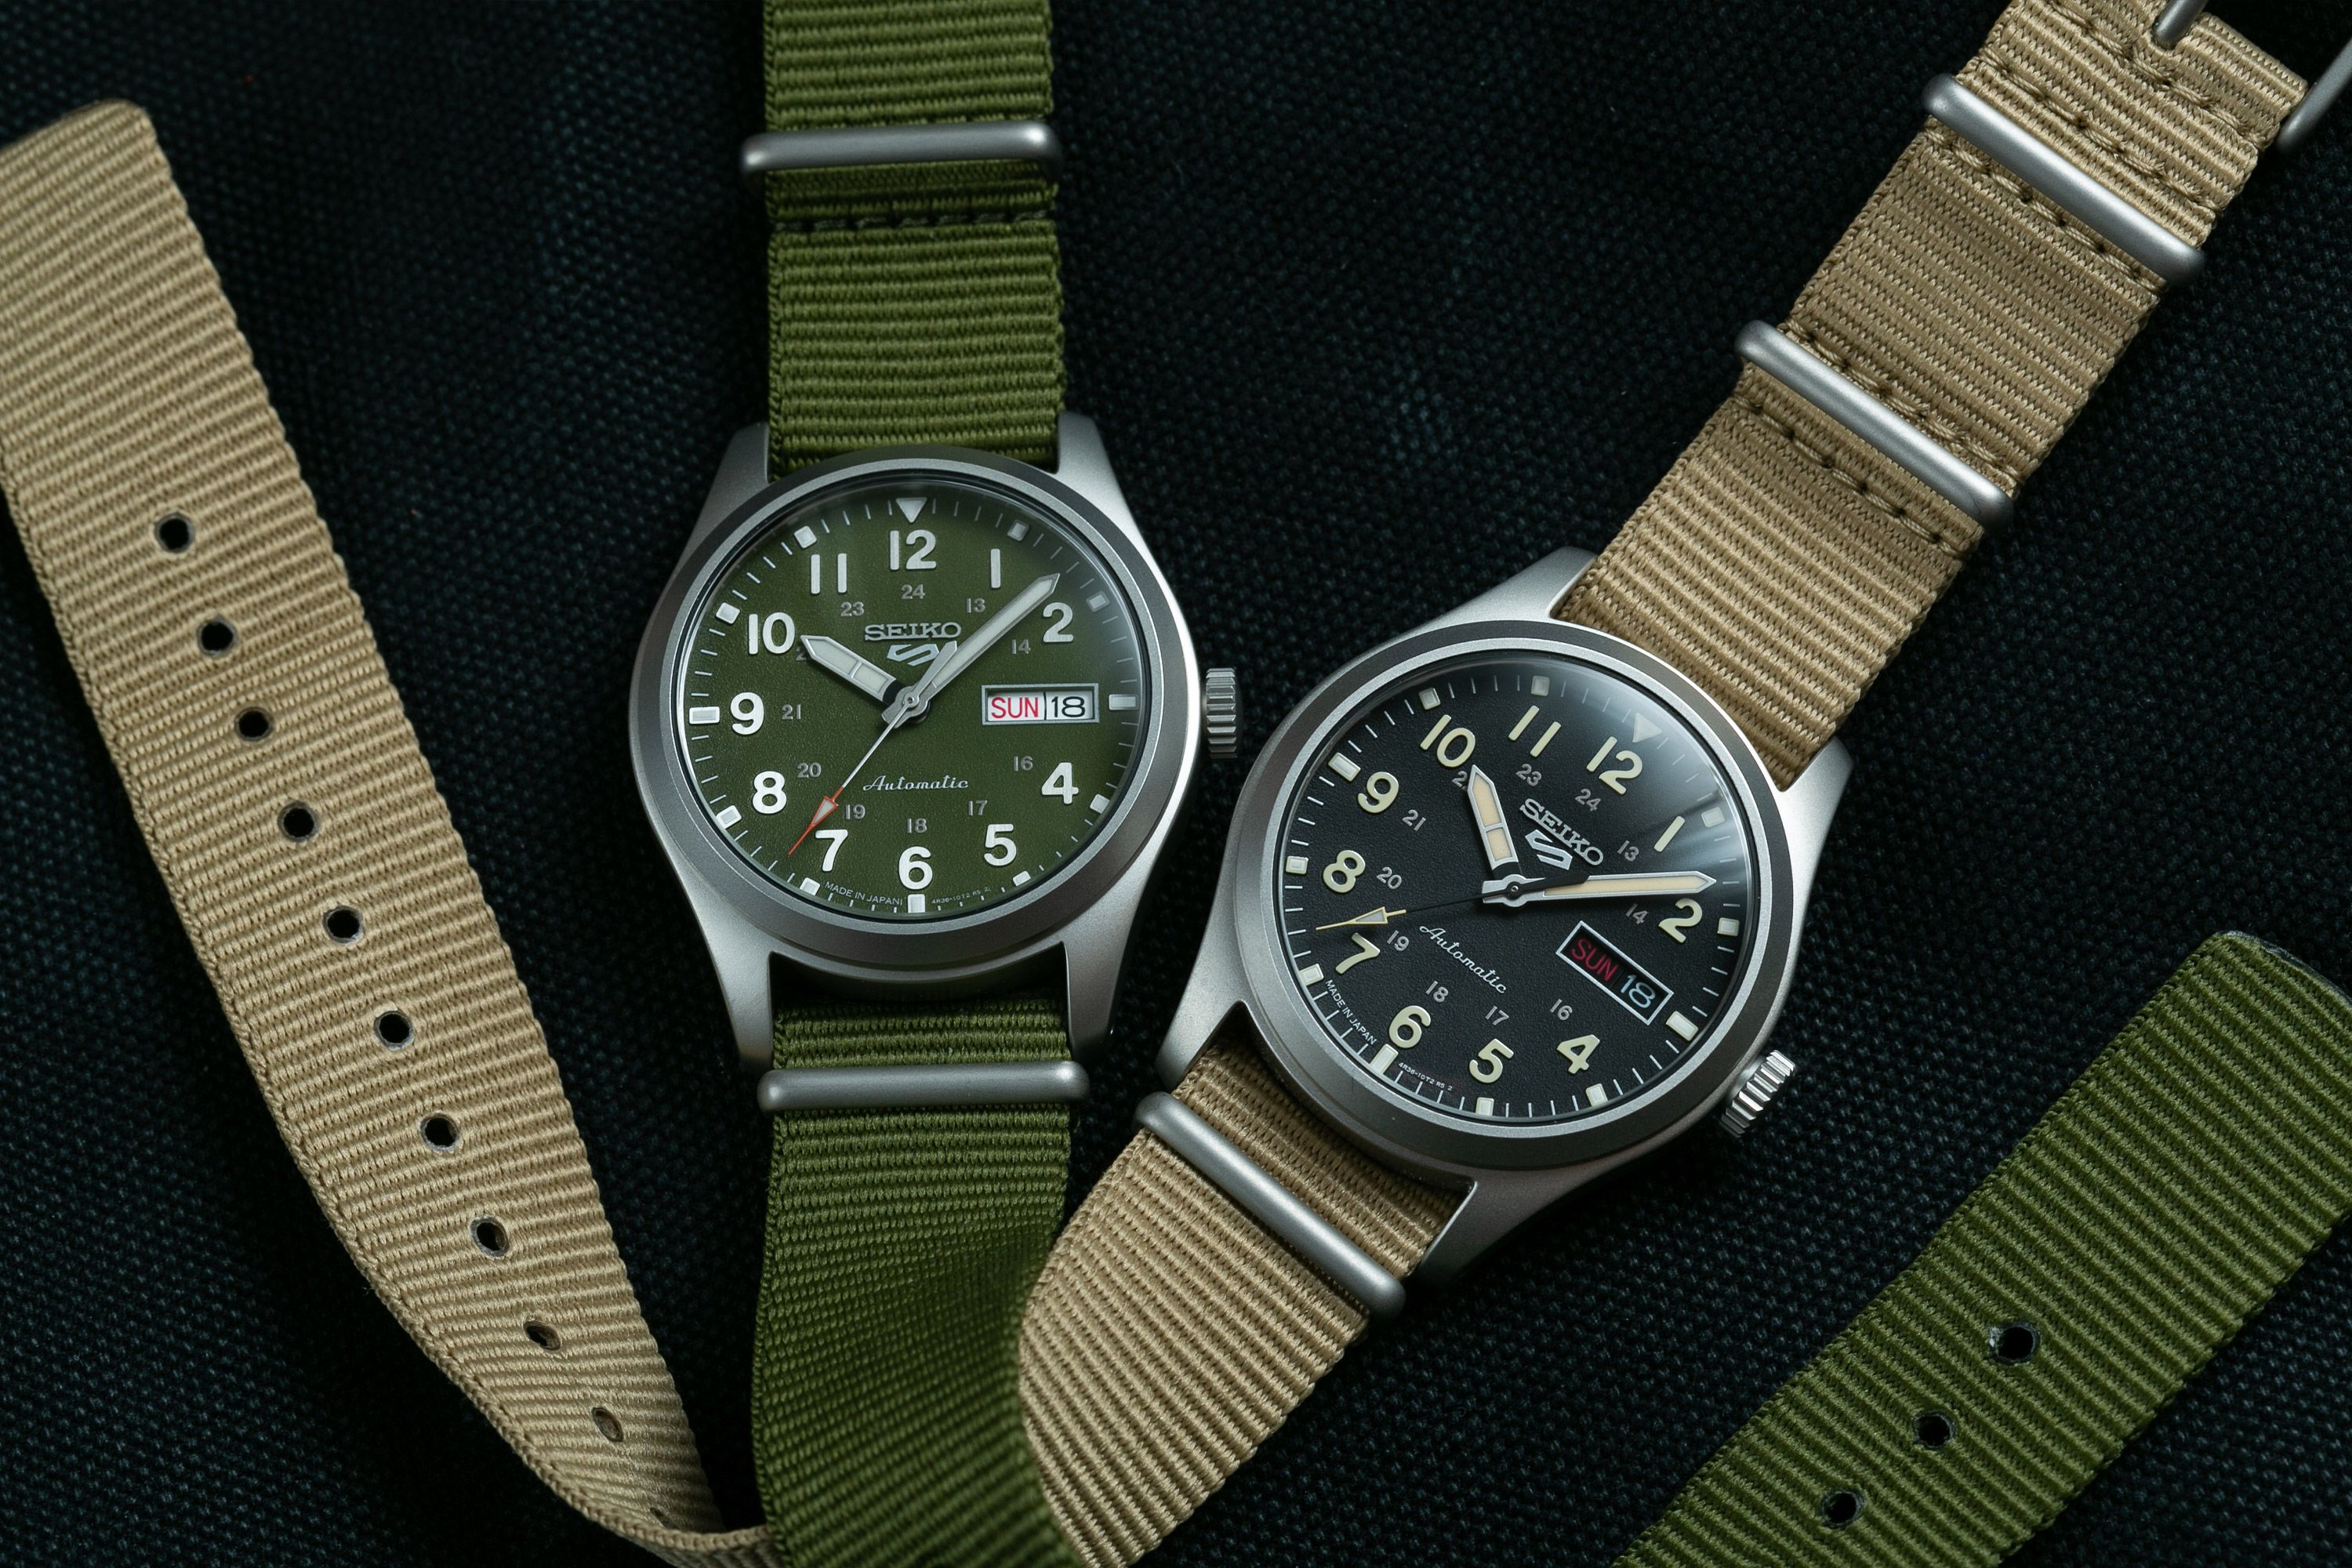 Seiko 5 Sports Field Watch Review: Can It Live Up to Its Lineage?